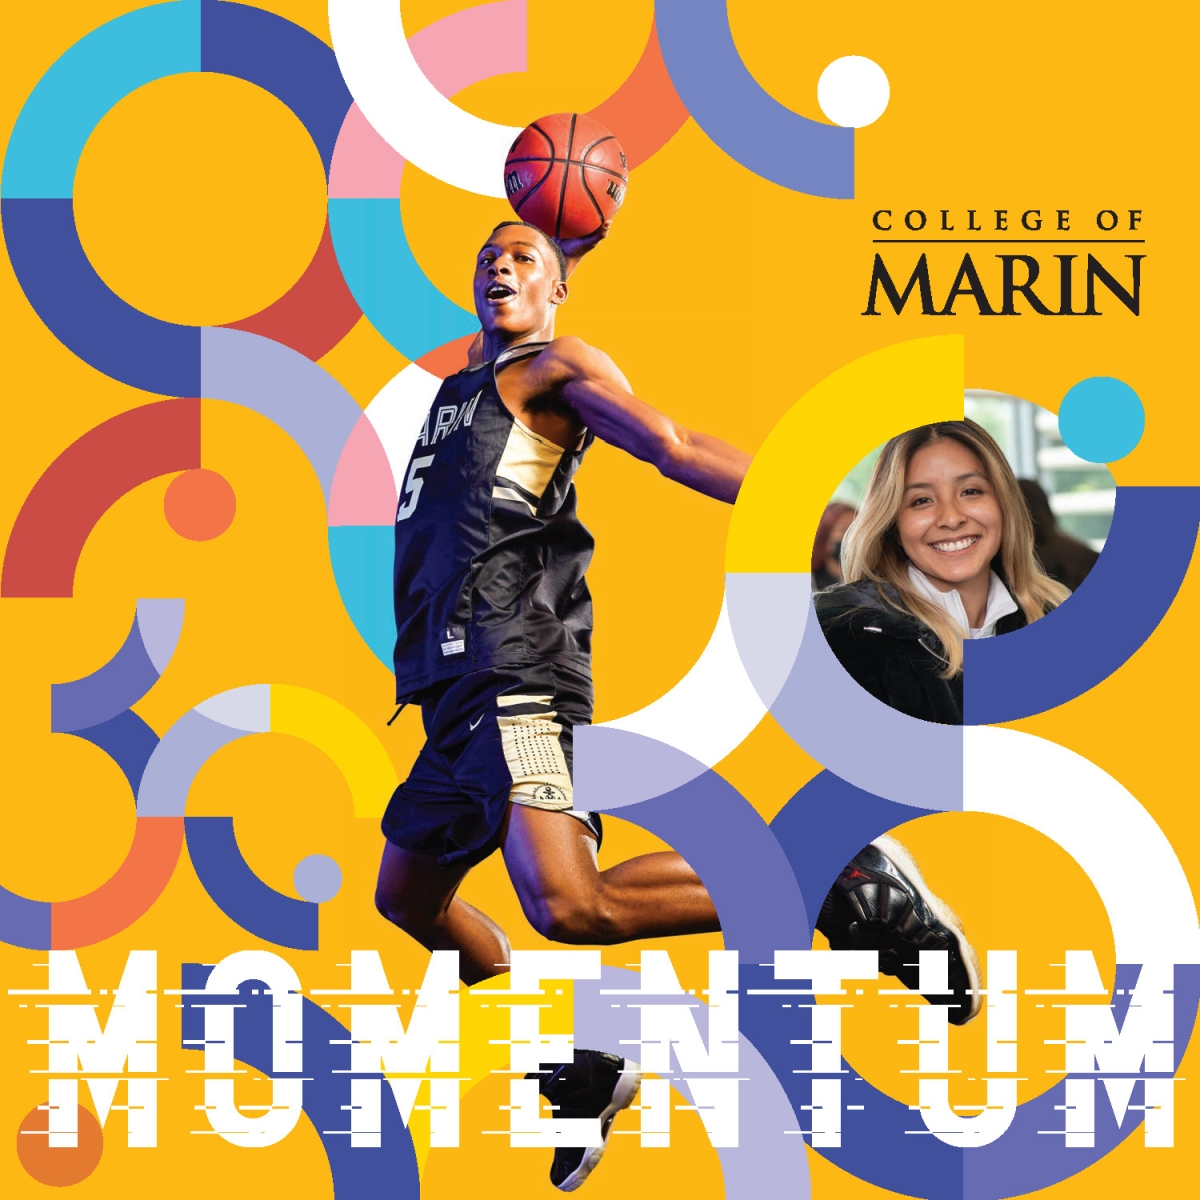 Publication cover featuring student-athlete playing basketball and student in classroom.